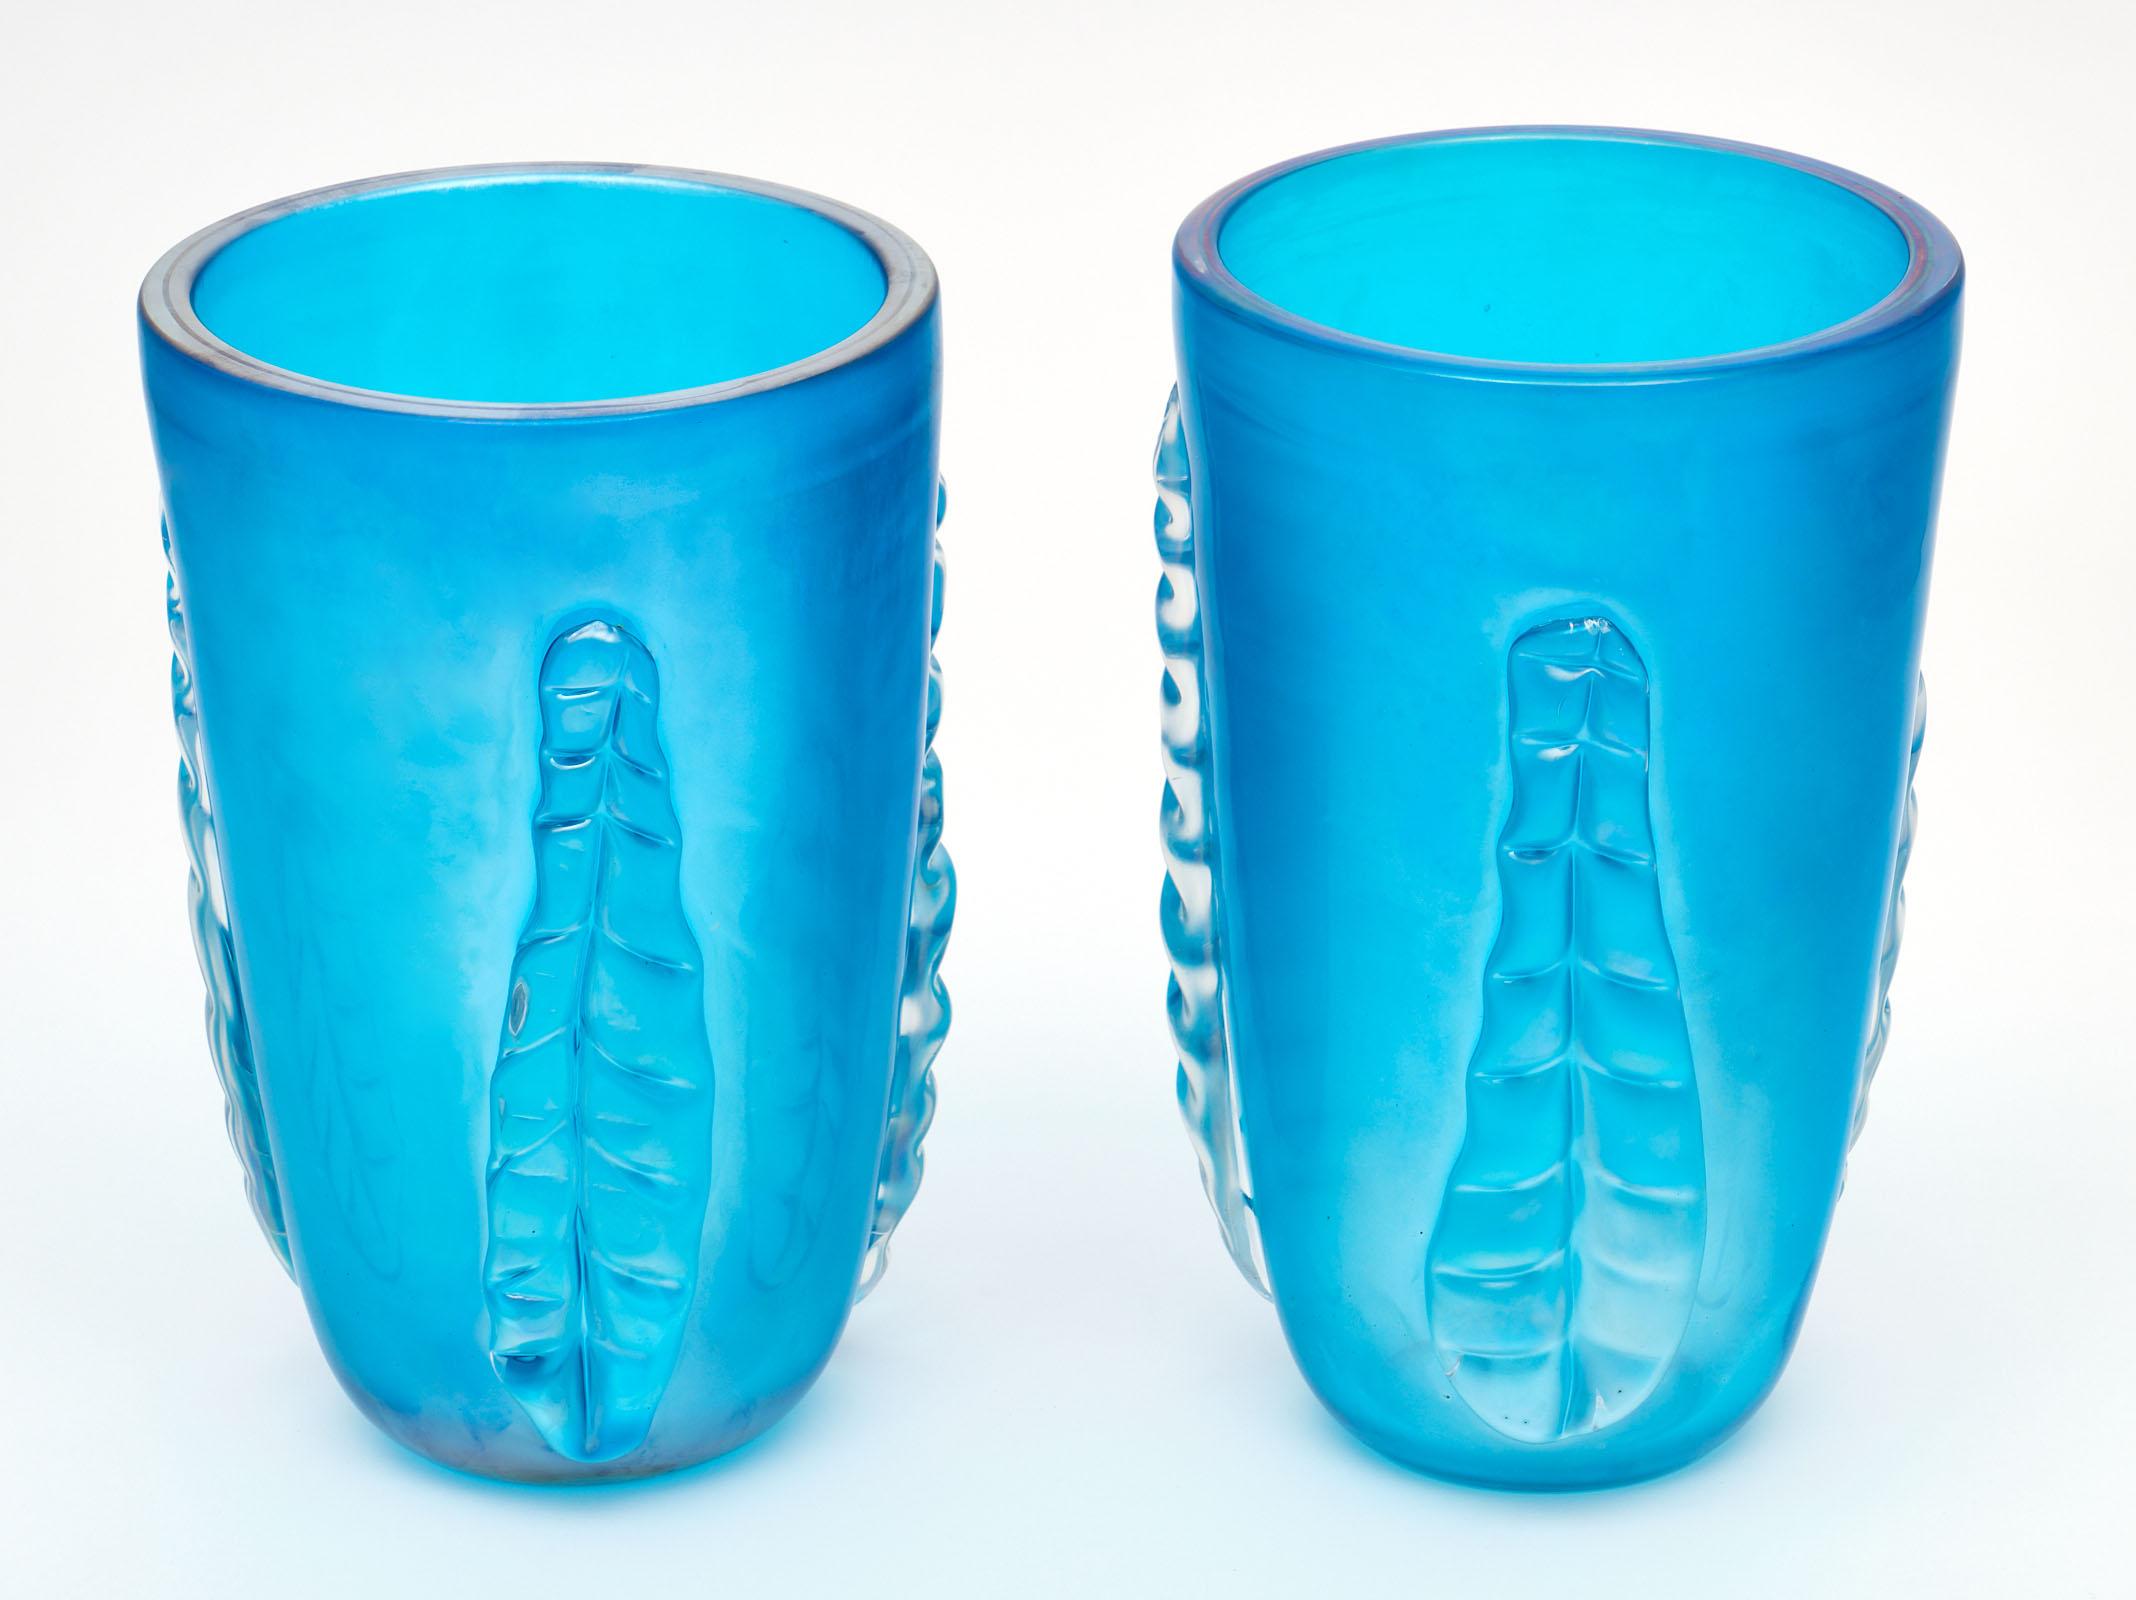 A pair of important blue Murano glass “Veronese” vases signed by Costantino. We love the deep aquamarine color of these hand blown vases.